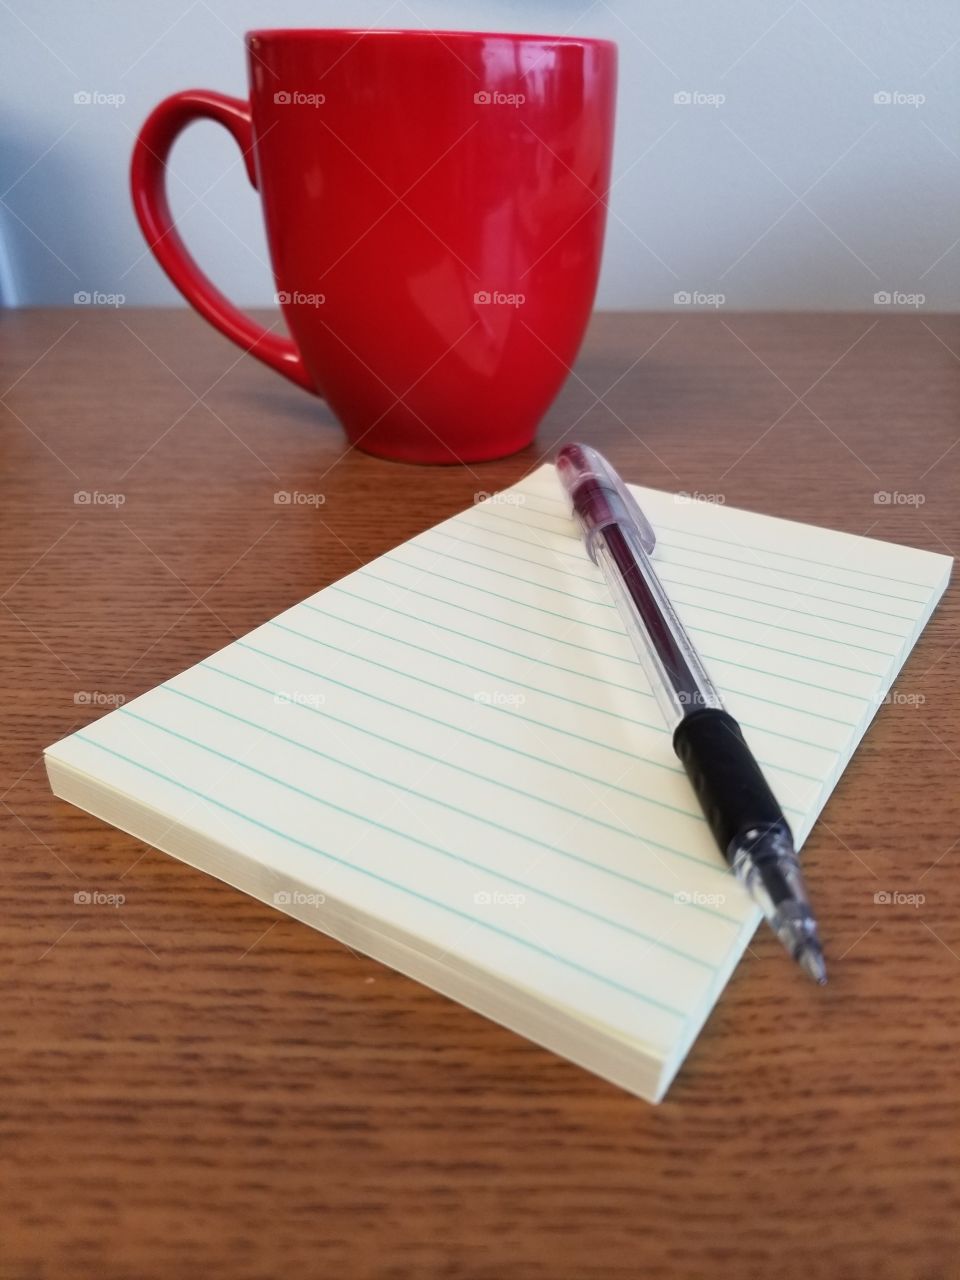 Ready to take notes. Red coffee cup with notpad and pen